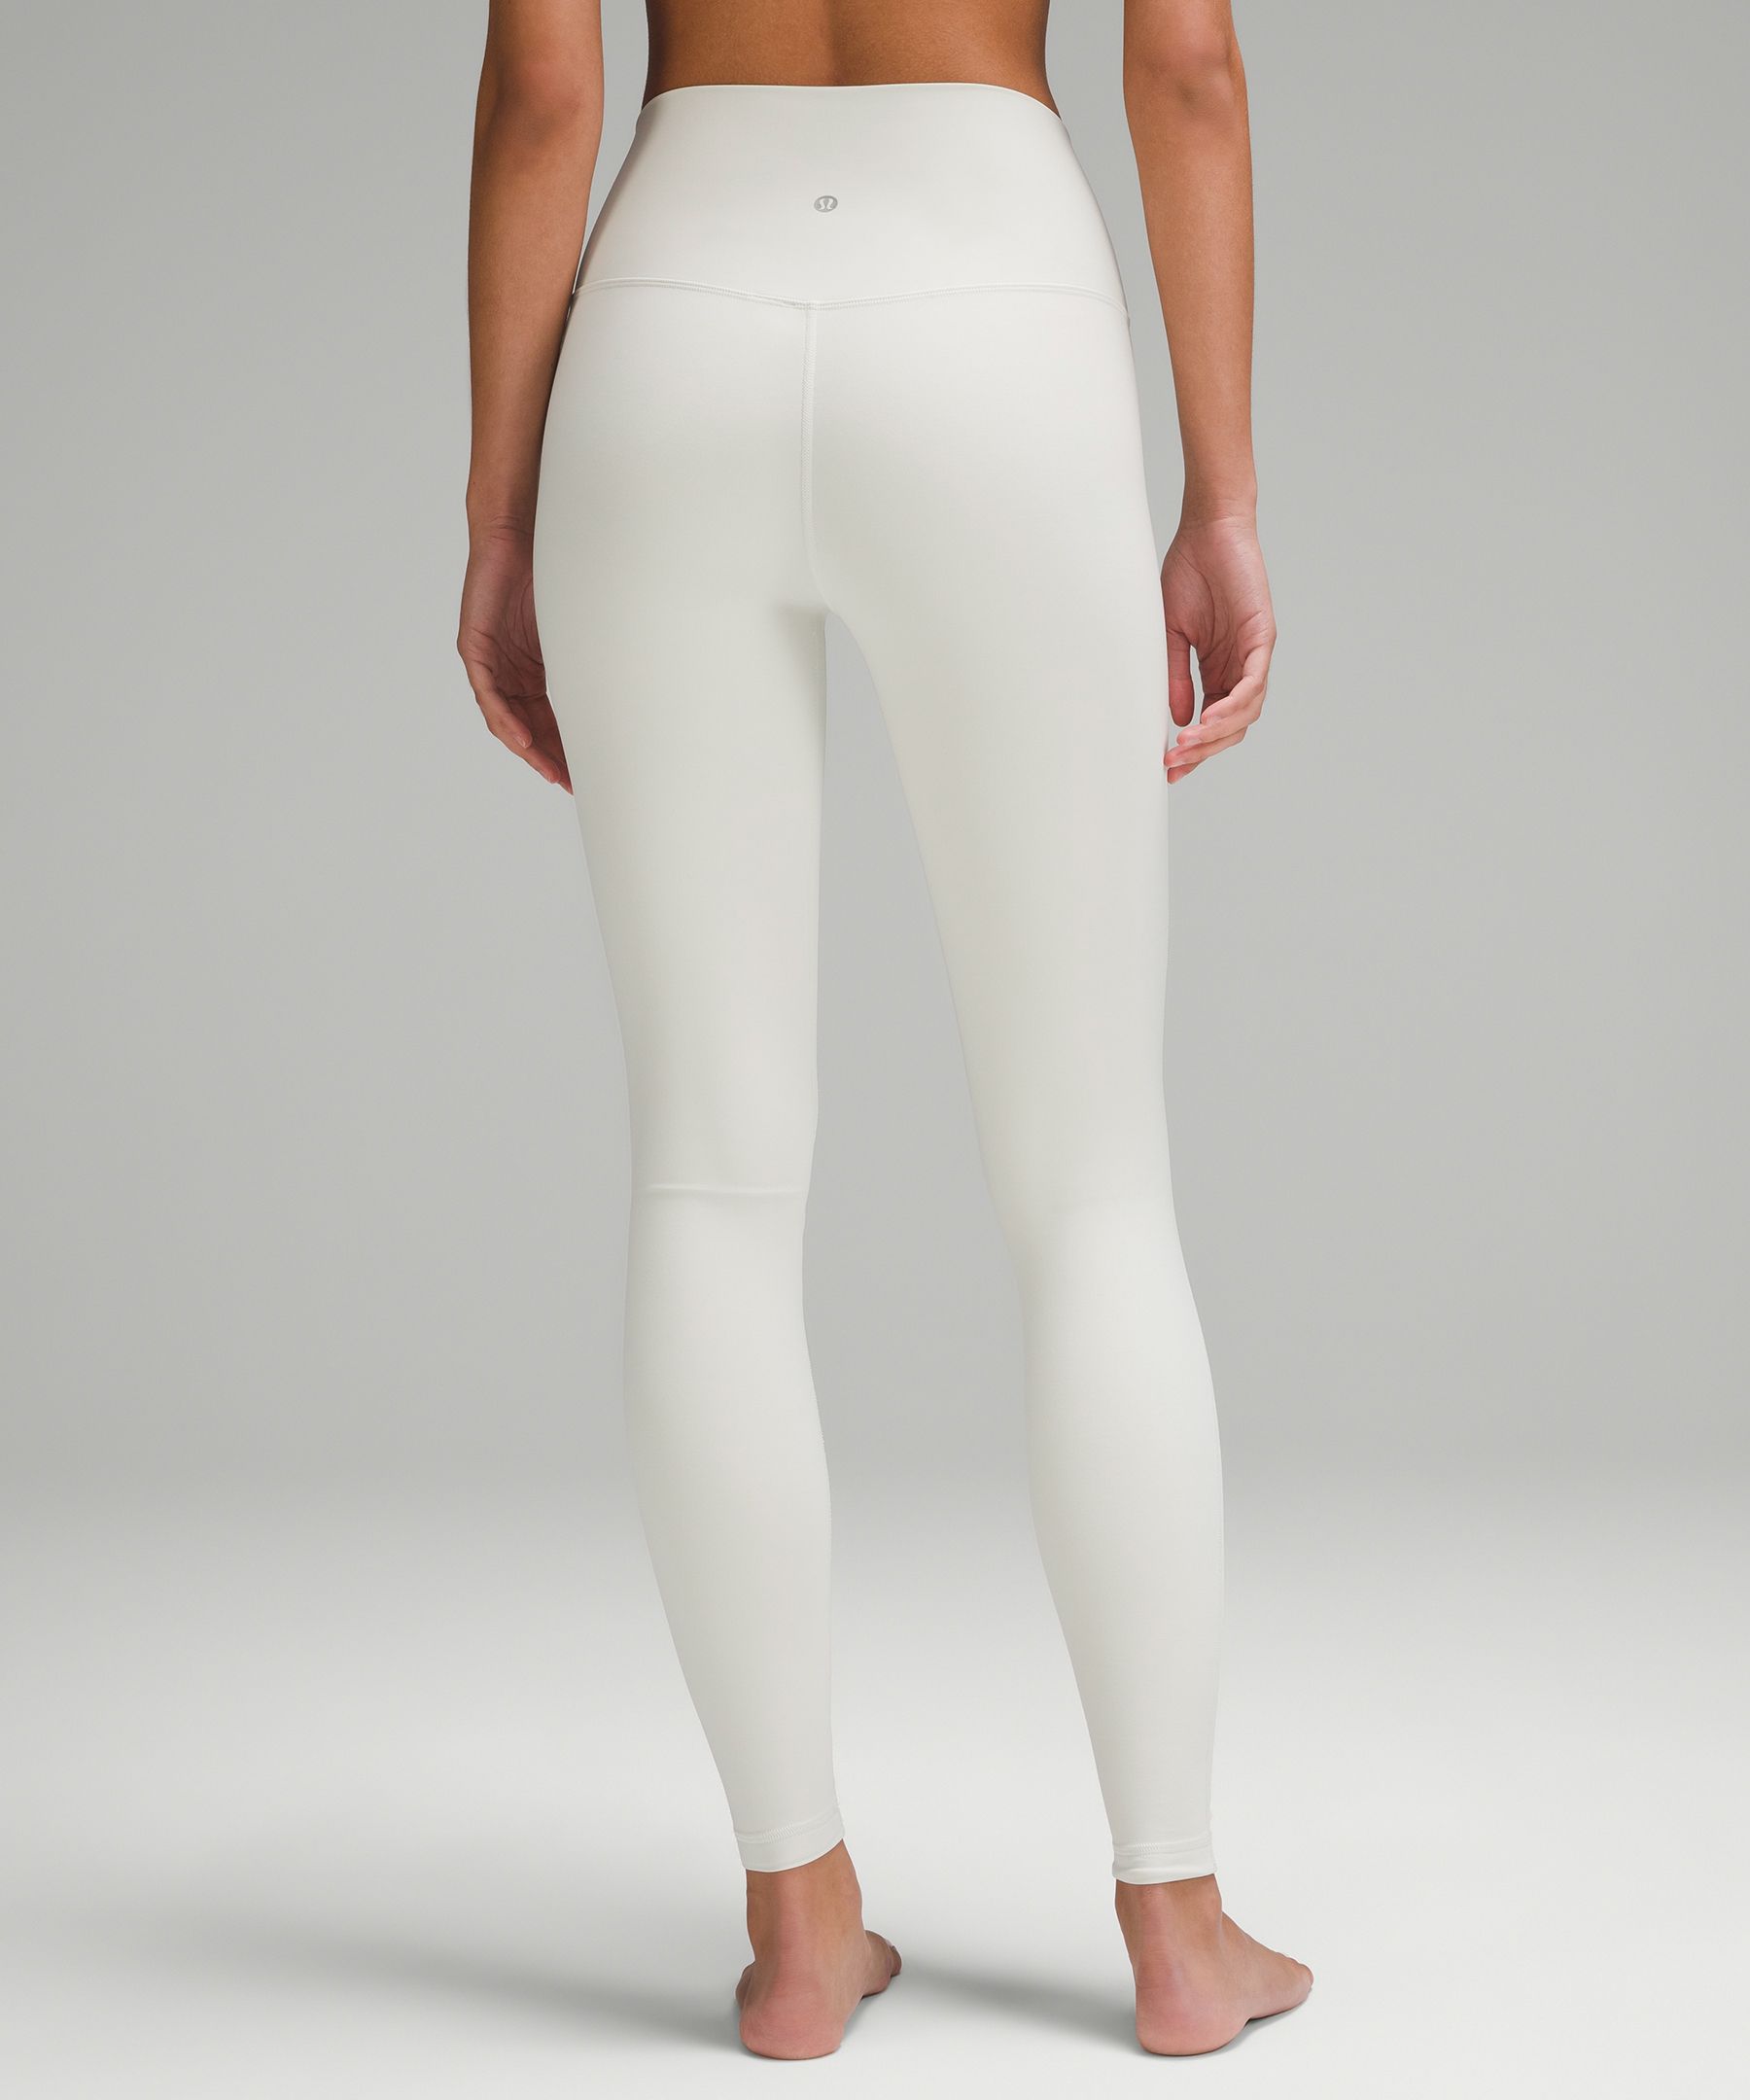 lululemon Align™ High-Rise Pant 28  High rise pants, Cropped white tee,  Comfy outfits